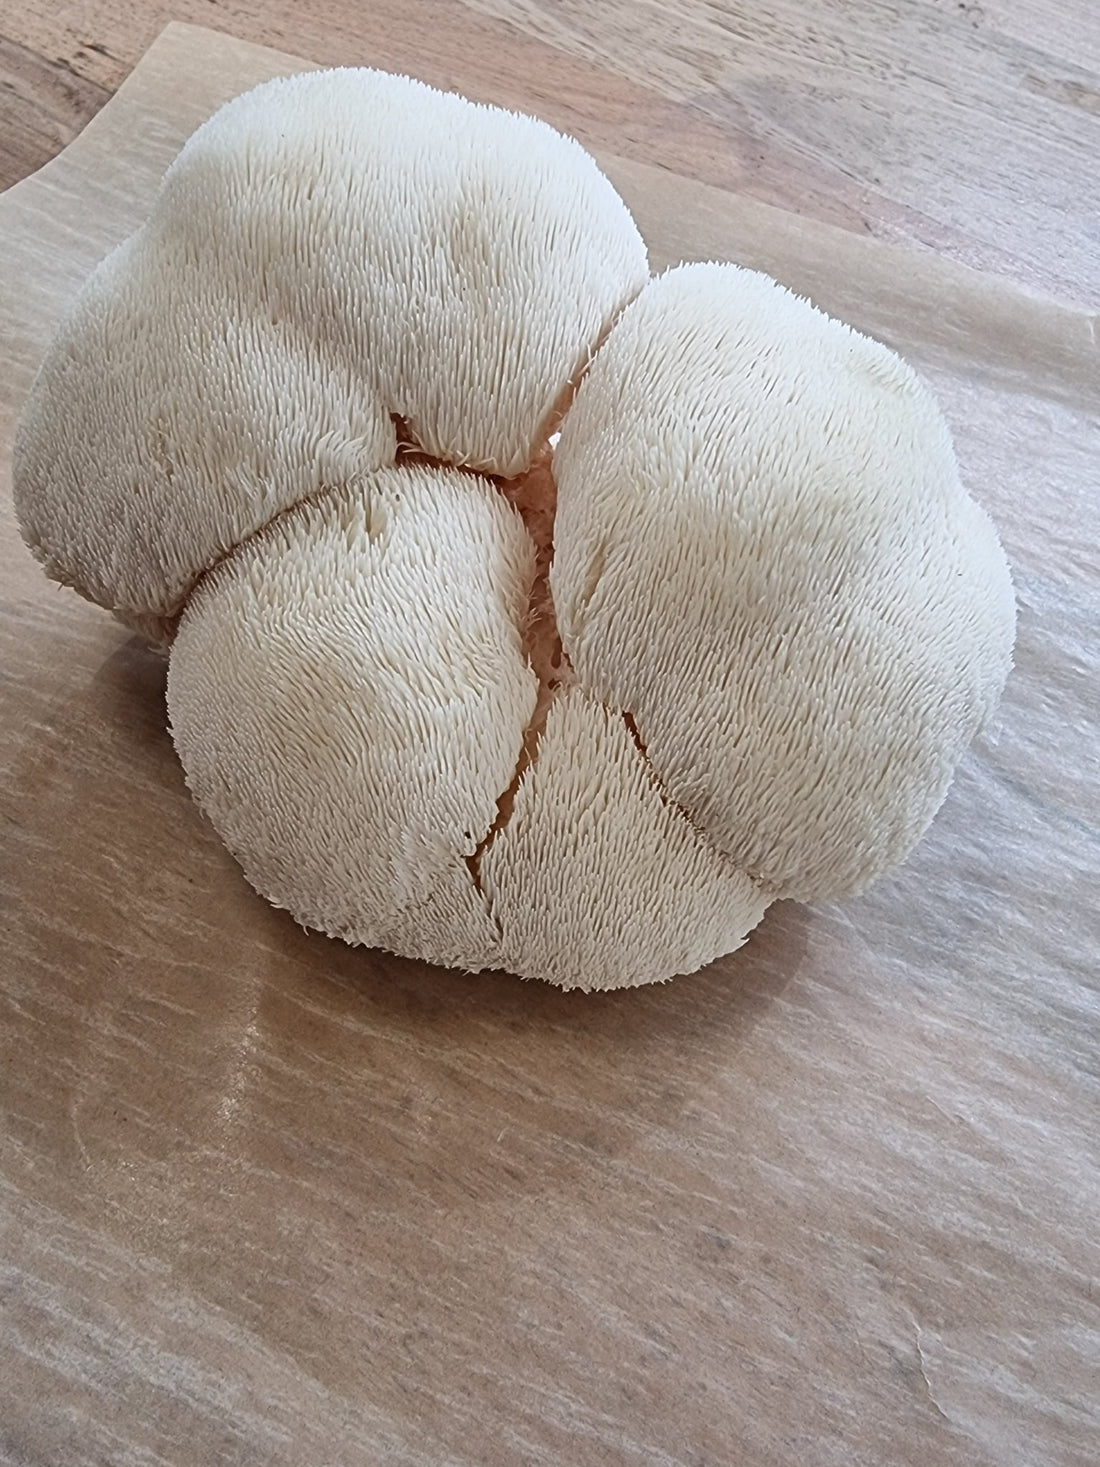 Can Lion's Mane Cure Cancer? - Xotic Mushrooms